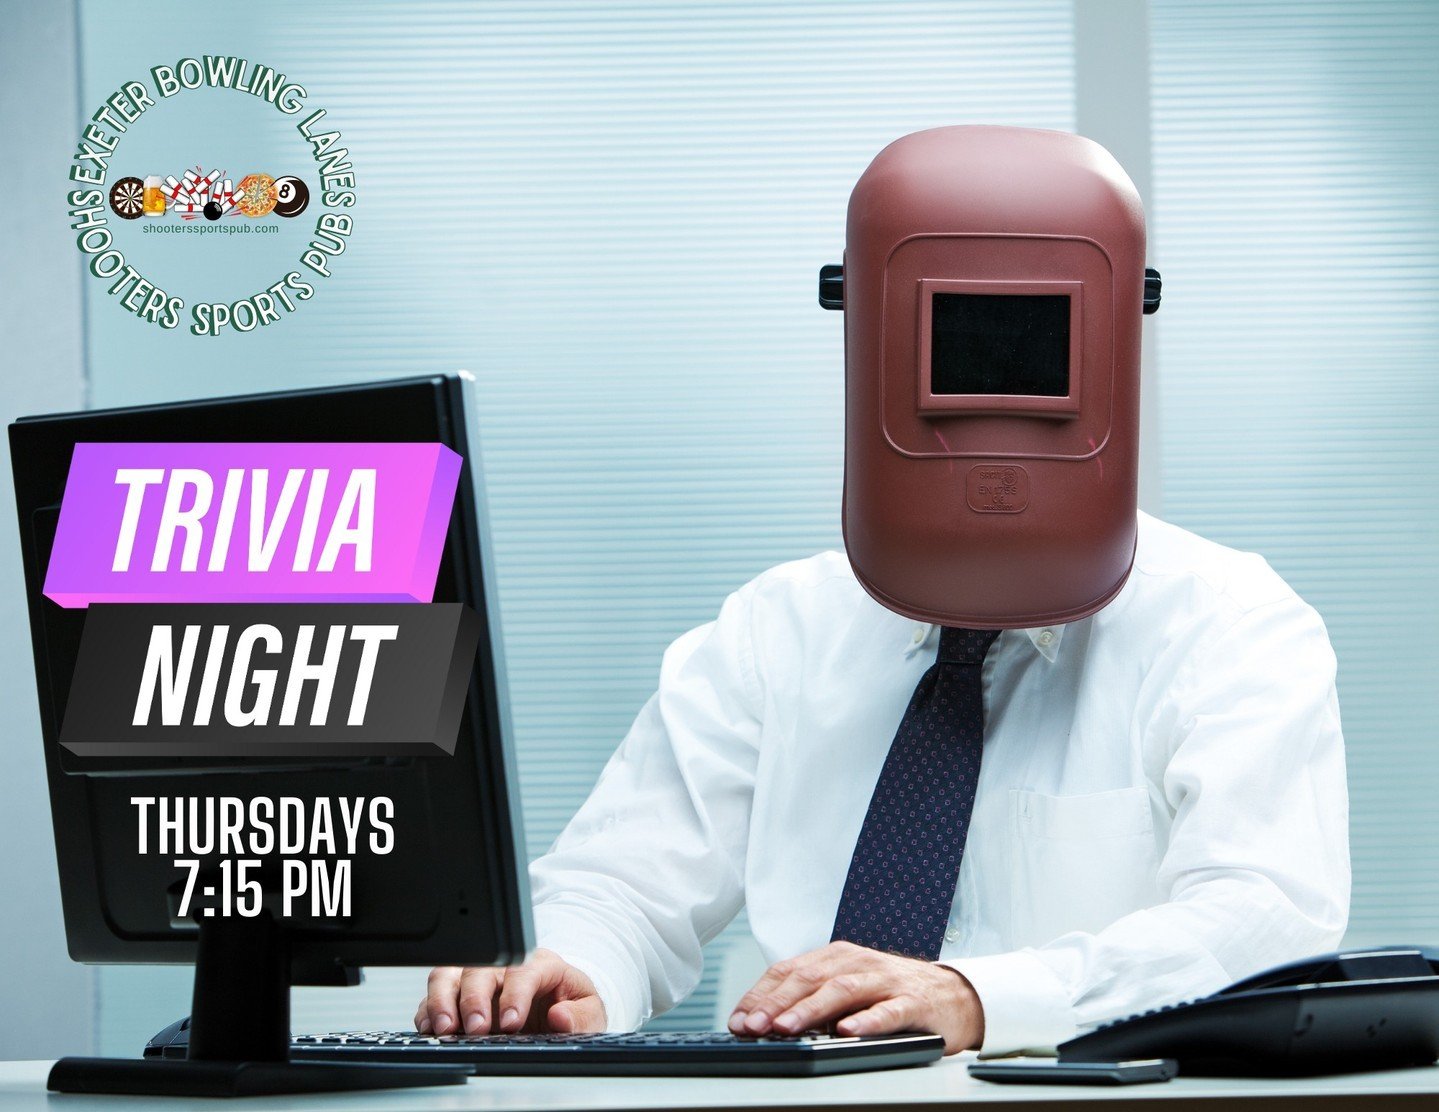 🤔✨ Thursday Night Trivia! 7:15 pm. ⁠
⁠
Think you have what it takes? Even if you're as prepared as a man wearing a welder's mask at a desk, we promise a night of fun, laughs, and brain teasers! #TriviaNight #QuizMasters⁠